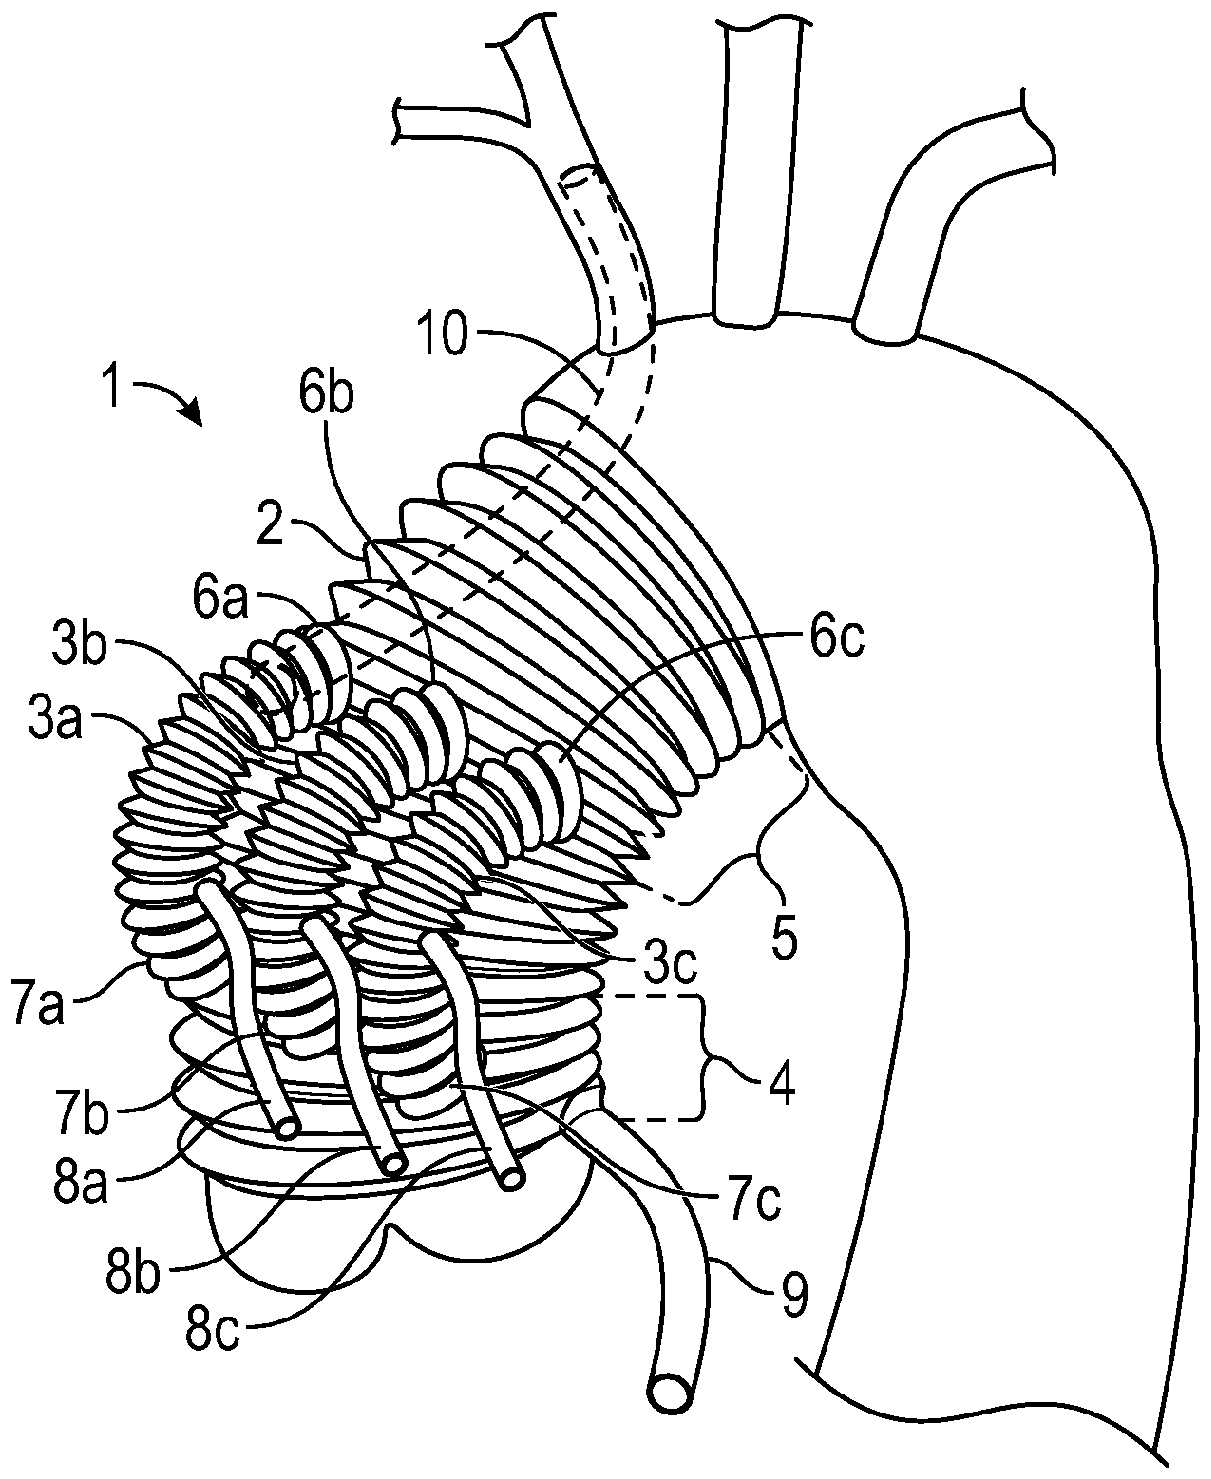 Systems and methods for treatment of aortic dissection